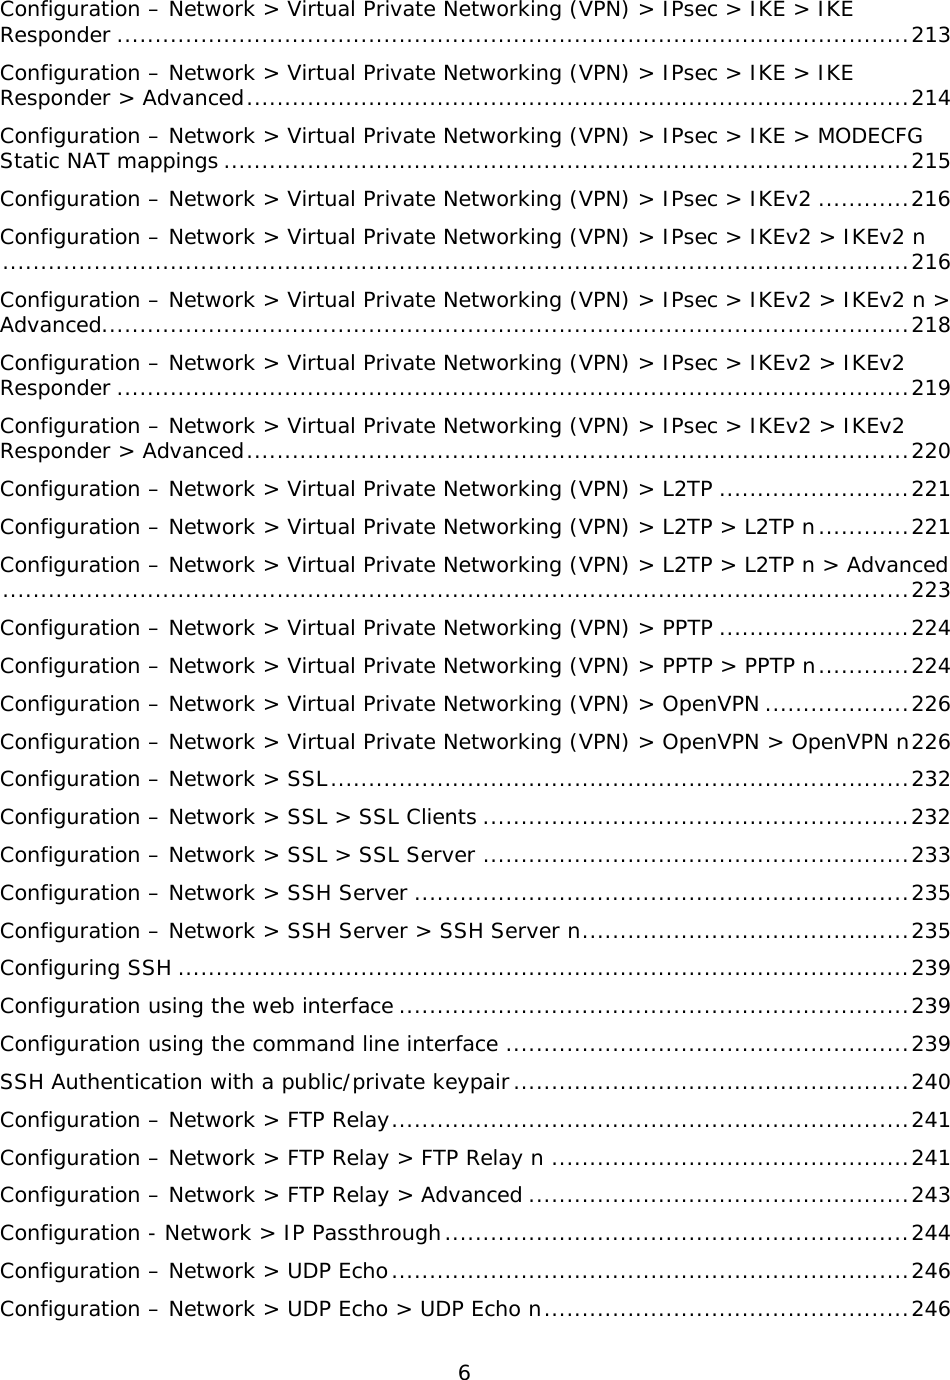 6  Configuration – Network &gt; Virtual Private Networking (VPN) &gt; IPsec &gt; IKE &gt; IKE Responder ........................................................................................................ 213 Configuration – Network &gt; Virtual Private Networking (VPN) &gt; IPsec &gt; IKE &gt; IKE Responder &gt; Advanced ....................................................................................... 214 Configuration – Network &gt; Virtual Private Networking (VPN) &gt; IPsec &gt; IKE &gt; MODECFG Static NAT mappings .......................................................................................... 215 Configuration – Network &gt; Virtual Private Networking (VPN) &gt; IPsec &gt; IKEv2 ............ 216 Configuration – Network &gt; Virtual Private Networking (VPN) &gt; IPsec &gt; IKEv2 &gt; IKEv2 n ....................................................................................................................... 216 Configuration – Network &gt; Virtual Private Networking (VPN) &gt; IPsec &gt; IKEv2 &gt; IKEv2 n &gt; Advanced .......................................................................................................... 218 Configuration – Network &gt; Virtual Private Networking (VPN) &gt; IPsec &gt; IKEv2 &gt; IKEv2 Responder ........................................................................................................ 219 Configuration – Network &gt; Virtual Private Networking (VPN) &gt; IPsec &gt; IKEv2 &gt; IKEv2 Responder &gt; Advanced ....................................................................................... 220 Configuration – Network &gt; Virtual Private Networking (VPN) &gt; L2TP ......................... 221 Configuration – Network &gt; Virtual Private Networking (VPN) &gt; L2TP &gt; L2TP n ............ 221 Configuration – Network &gt; Virtual Private Networking (VPN) &gt; L2TP &gt; L2TP n &gt; Advanced ....................................................................................................................... 223 Configuration – Network &gt; Virtual Private Networking (VPN) &gt; PPTP ......................... 224 Configuration – Network &gt; Virtual Private Networking (VPN) &gt; PPTP &gt; PPTP n ............ 224 Configuration – Network &gt; Virtual Private Networking (VPN) &gt; OpenVPN ................... 226 Configuration – Network &gt; Virtual Private Networking (VPN) &gt; OpenVPN &gt; OpenVPN n 226 Configuration – Network &gt; SSL ............................................................................ 232 Configuration – Network &gt; SSL &gt; SSL Clients ........................................................ 232 Configuration – Network &gt; SSL &gt; SSL Server ........................................................ 233 Configuration – Network &gt; SSH Server ................................................................. 235 Configuration – Network &gt; SSH Server &gt; SSH Server n ........................................... 235 Configuring SSH ................................................................................................ 239 Configuration using the web interface ................................................................... 239 Configuration using the command line interface ..................................................... 239 SSH Authentication with a public/private keypair .................................................... 240 Configuration – Network &gt; FTP Relay .................................................................... 241 Configuration – Network &gt; FTP Relay &gt; FTP Relay n ............................................... 241 Configuration – Network &gt; FTP Relay &gt; Advanced .................................................. 243 Configuration - Network &gt; IP Passthrough ............................................................. 244 Configuration – Network &gt; UDP Echo .................................................................... 246 Configuration – Network &gt; UDP Echo &gt; UDP Echo n ................................................ 246 